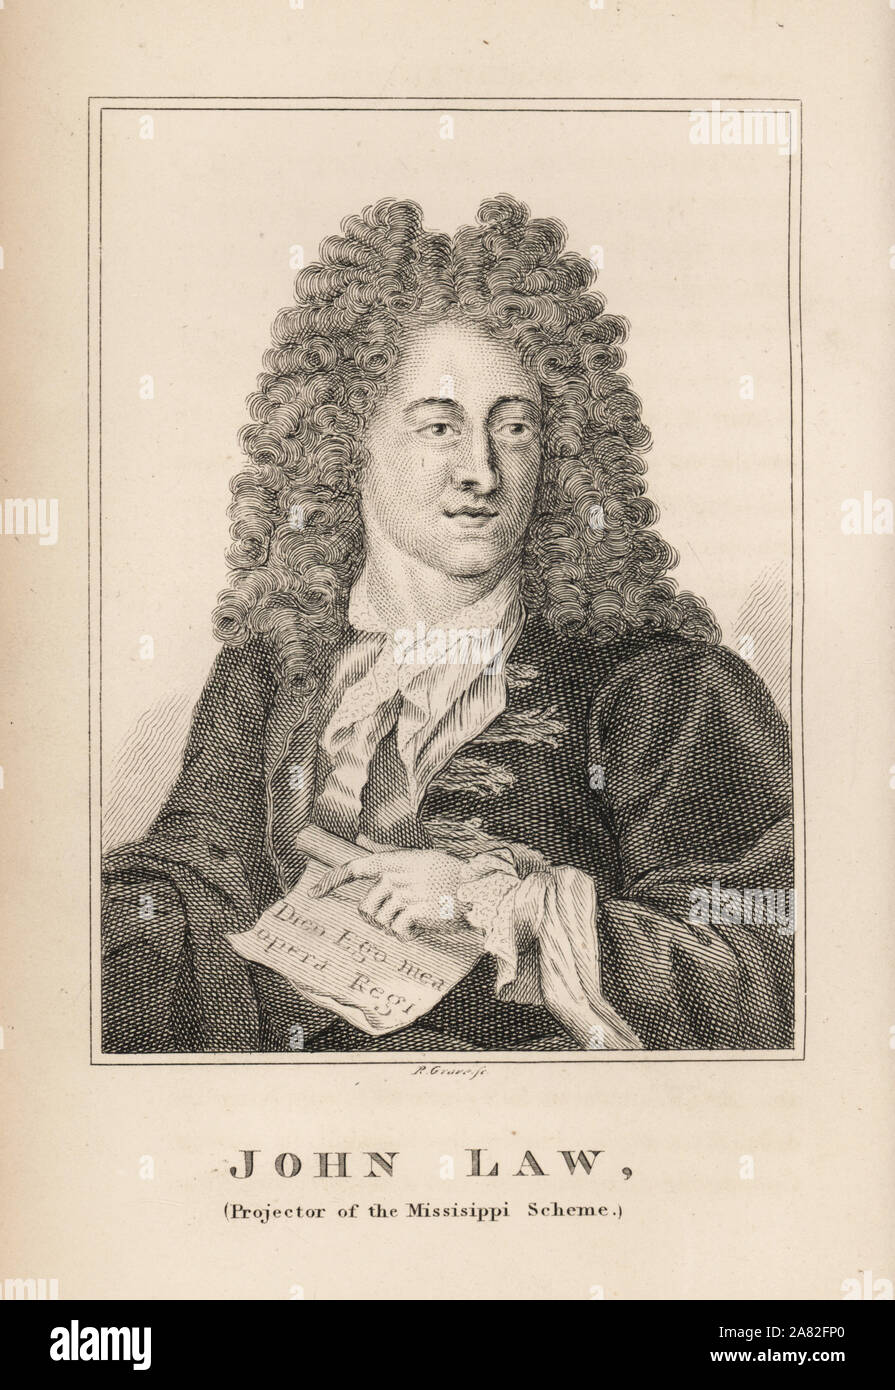 John Law, murderer, gambler, projector of the failed Missisippi Scheme, died 1729. Engraving by R. Grave from James Caulfield's Portraits, Memoirs and Characters of Remarkable Persons, London, 1819. Stock Photo